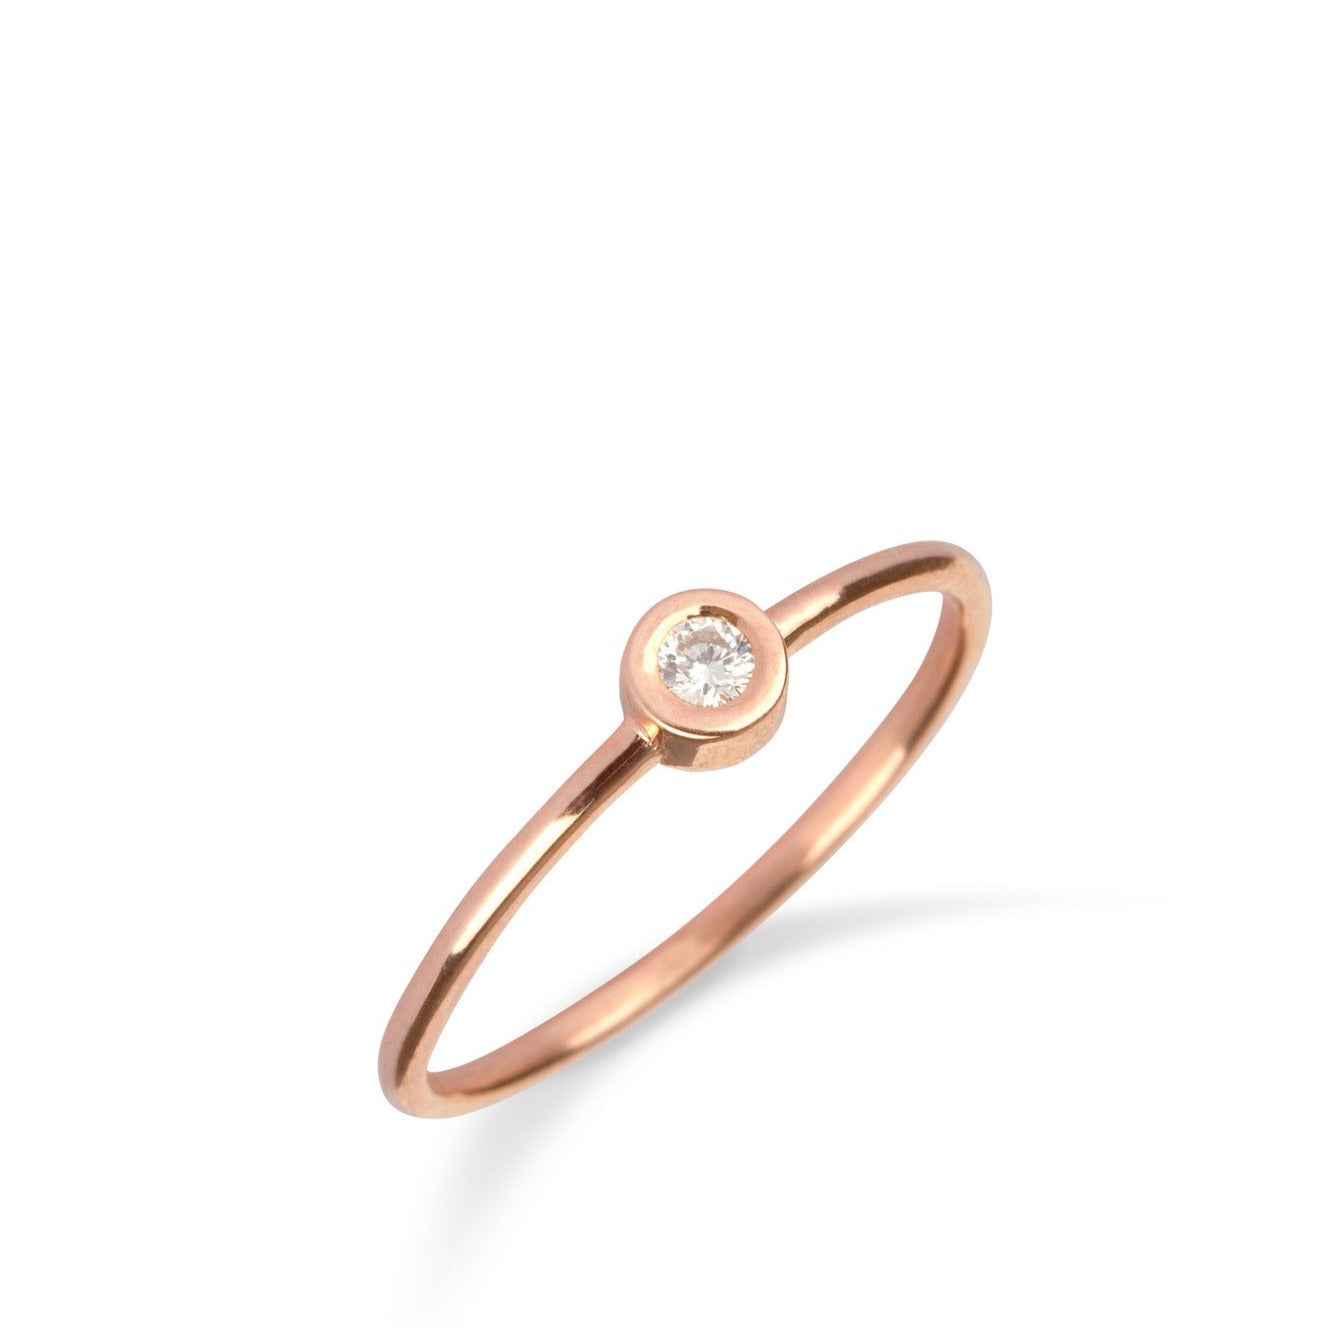 MoMuse | 9kt Gold Solitaire Diamond Ring